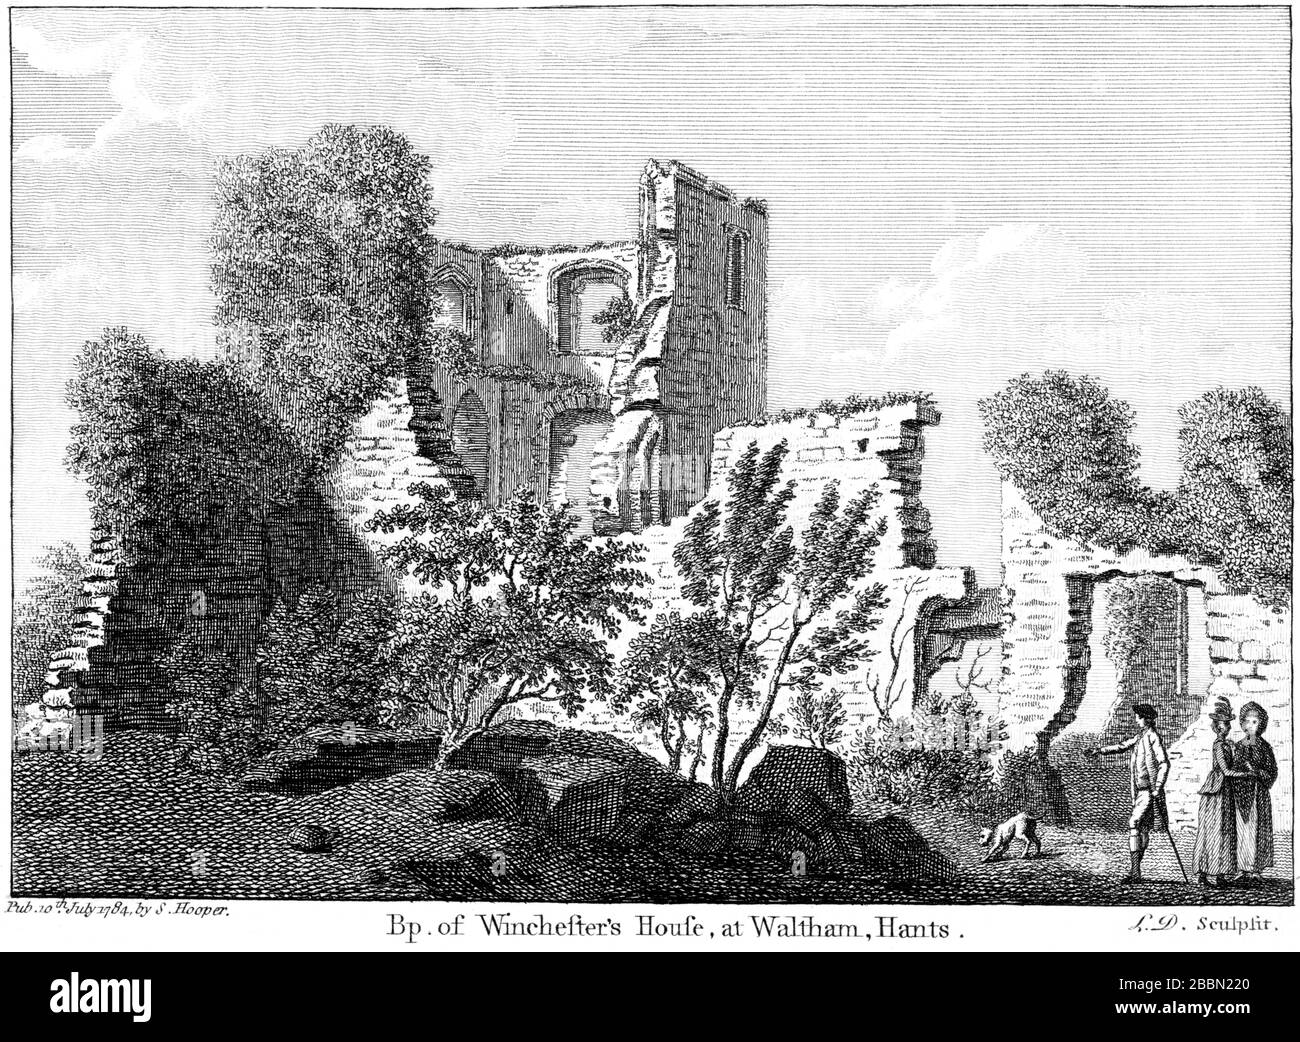 An engraving of Bp. of Winchesters House, at Waltham, Hants 1784 (Bishops Waltham Palace) scanned at high resolution from a book published around 1786 Stock Photo